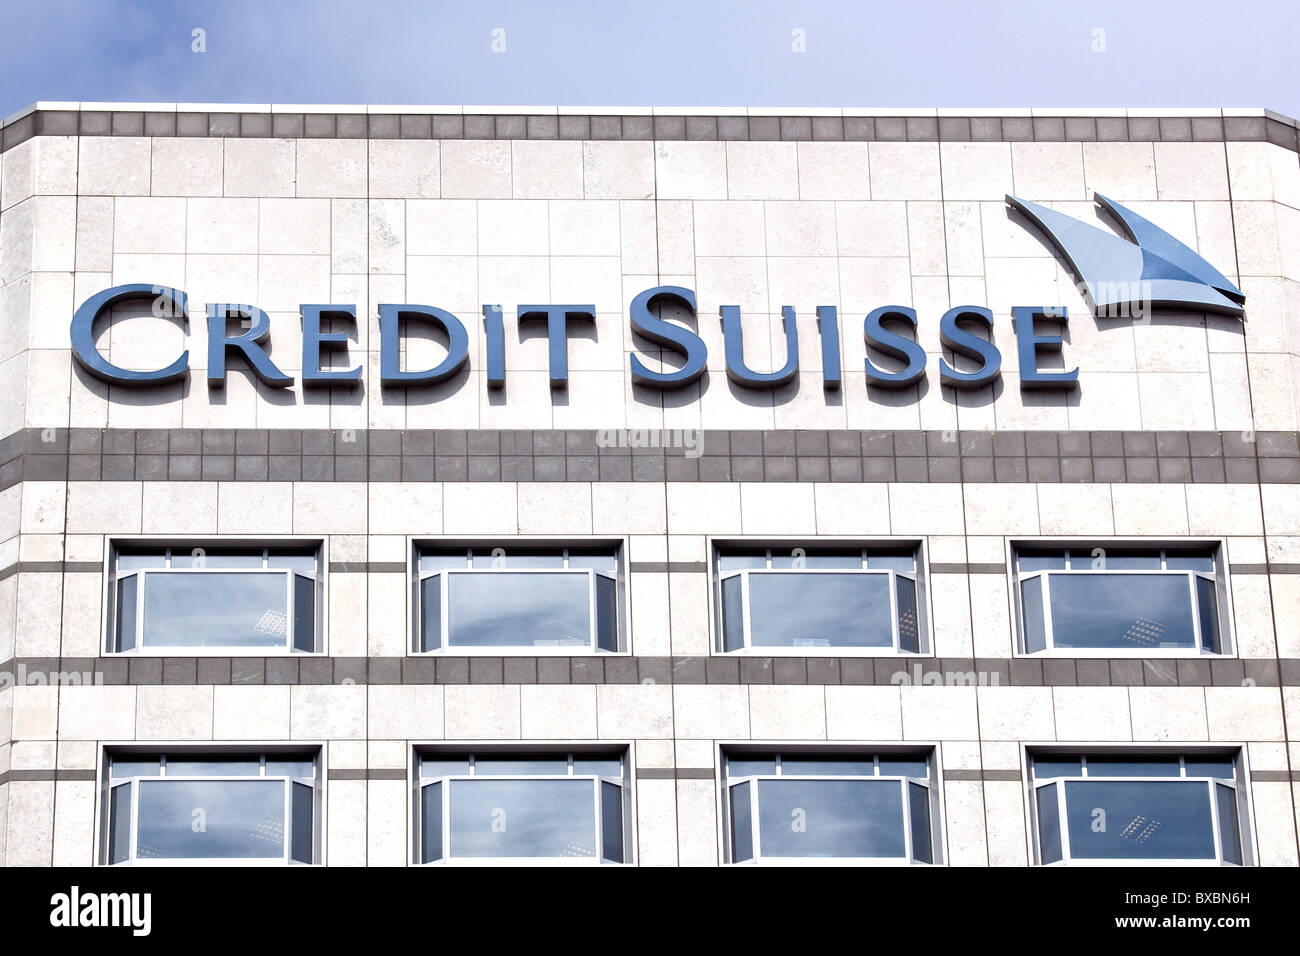 The Swiss bank Credit Suisse in Canary Wharf, London, England, United Kingdom, Europe Stock Photo